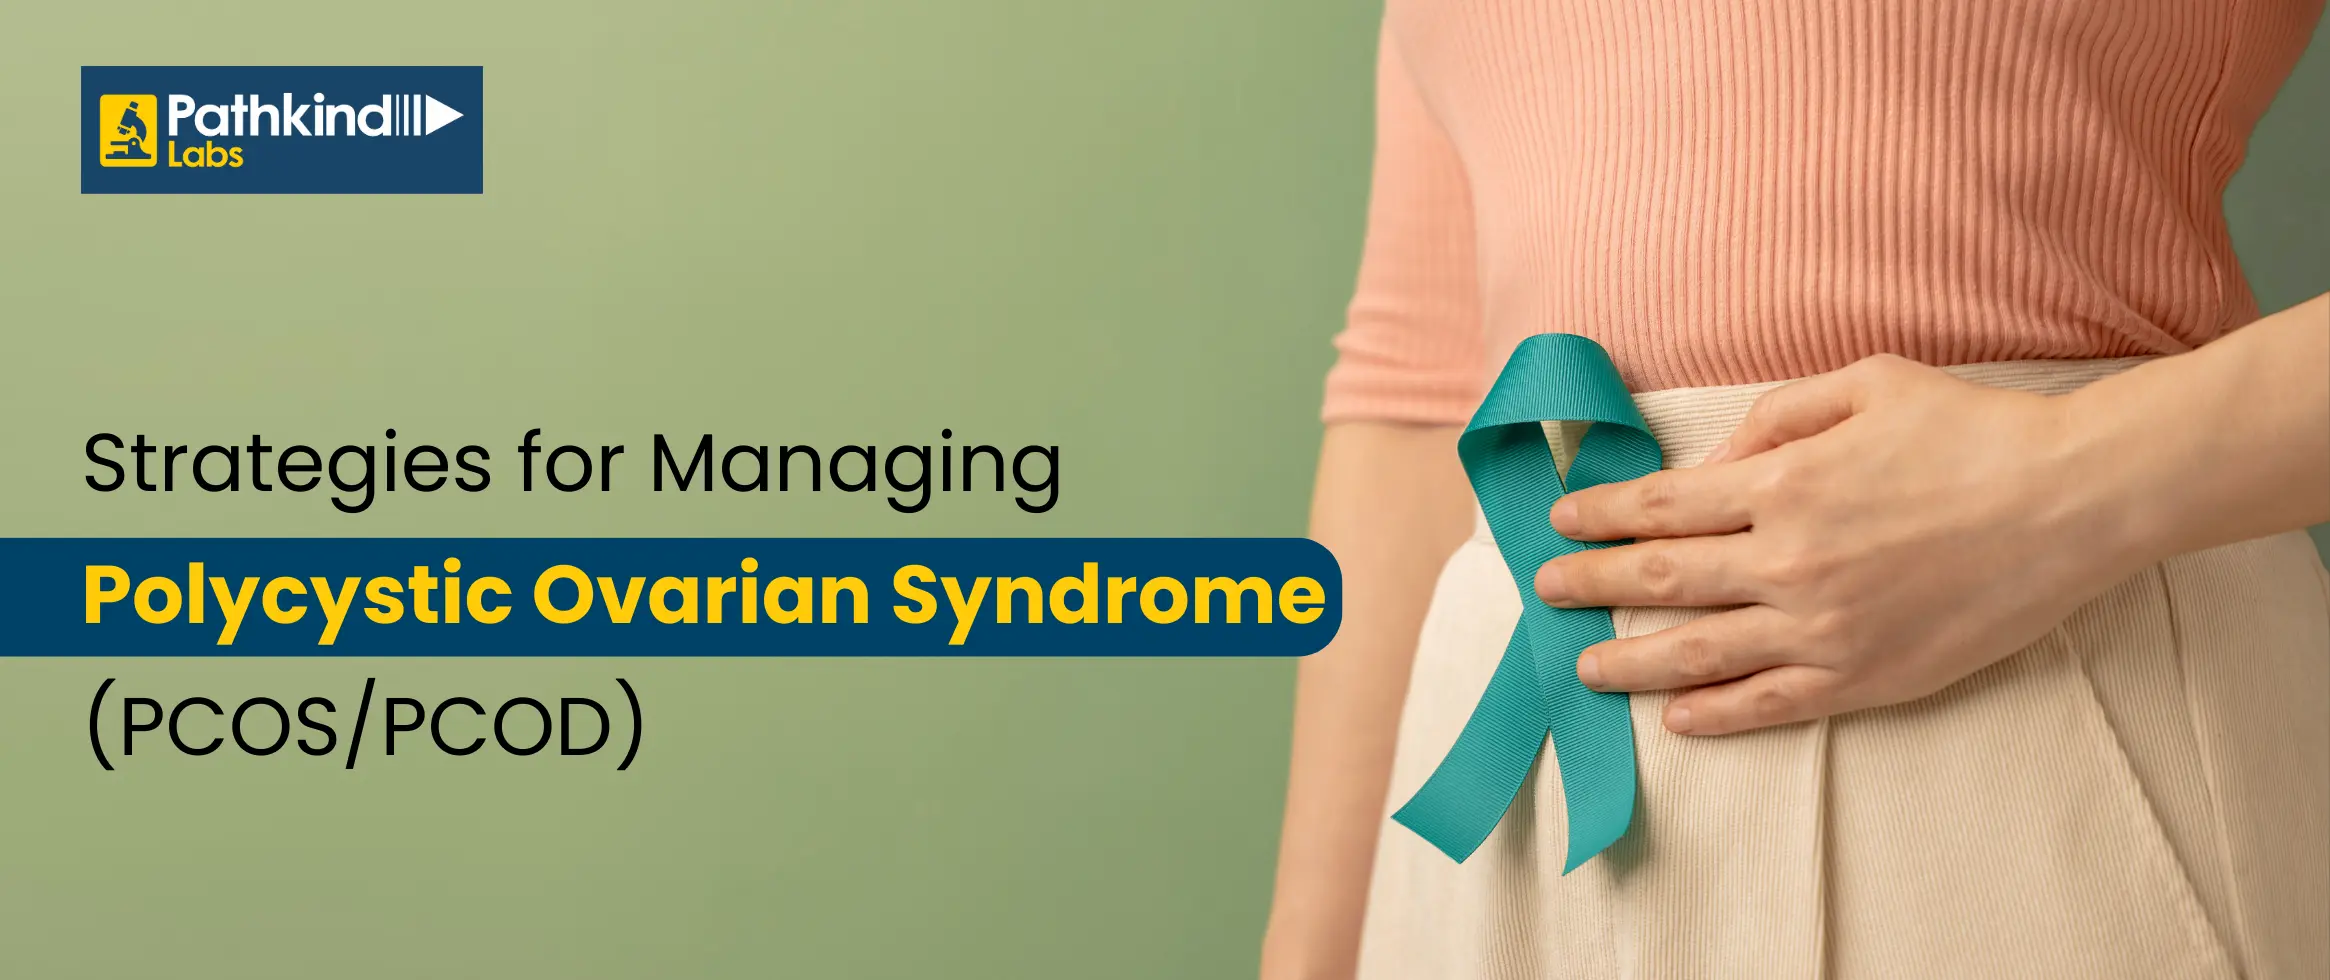  Strategies for Managing Polycystic Ovarian Syndrome (PCOS)